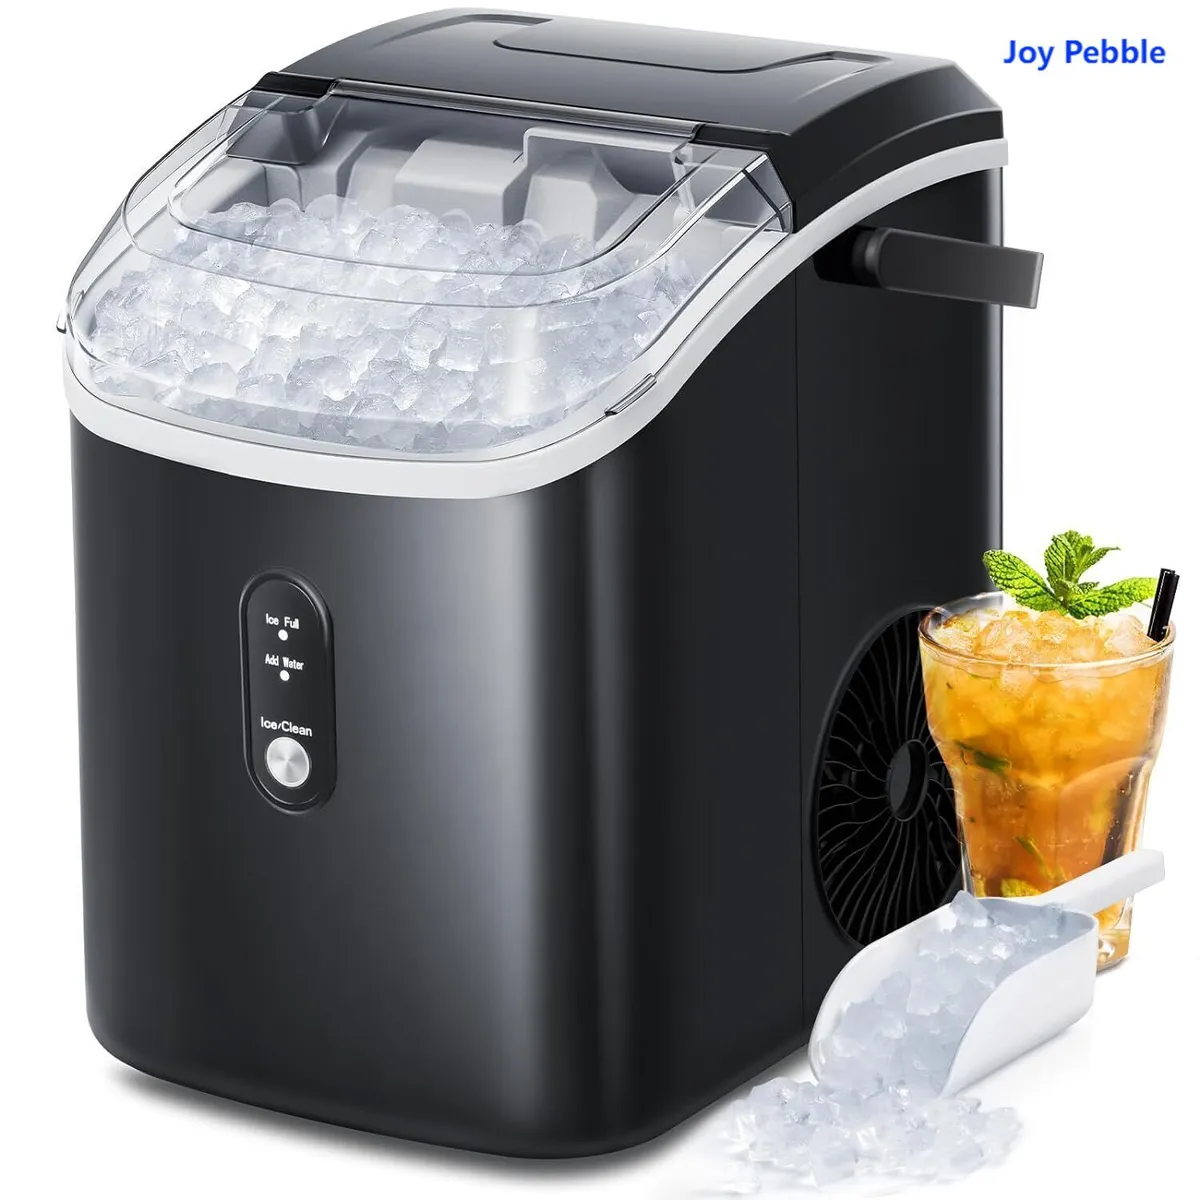 Nugget Ice Maker Countertop,Pellet ice,35lbs/24H,with Self-Cleaning,sell